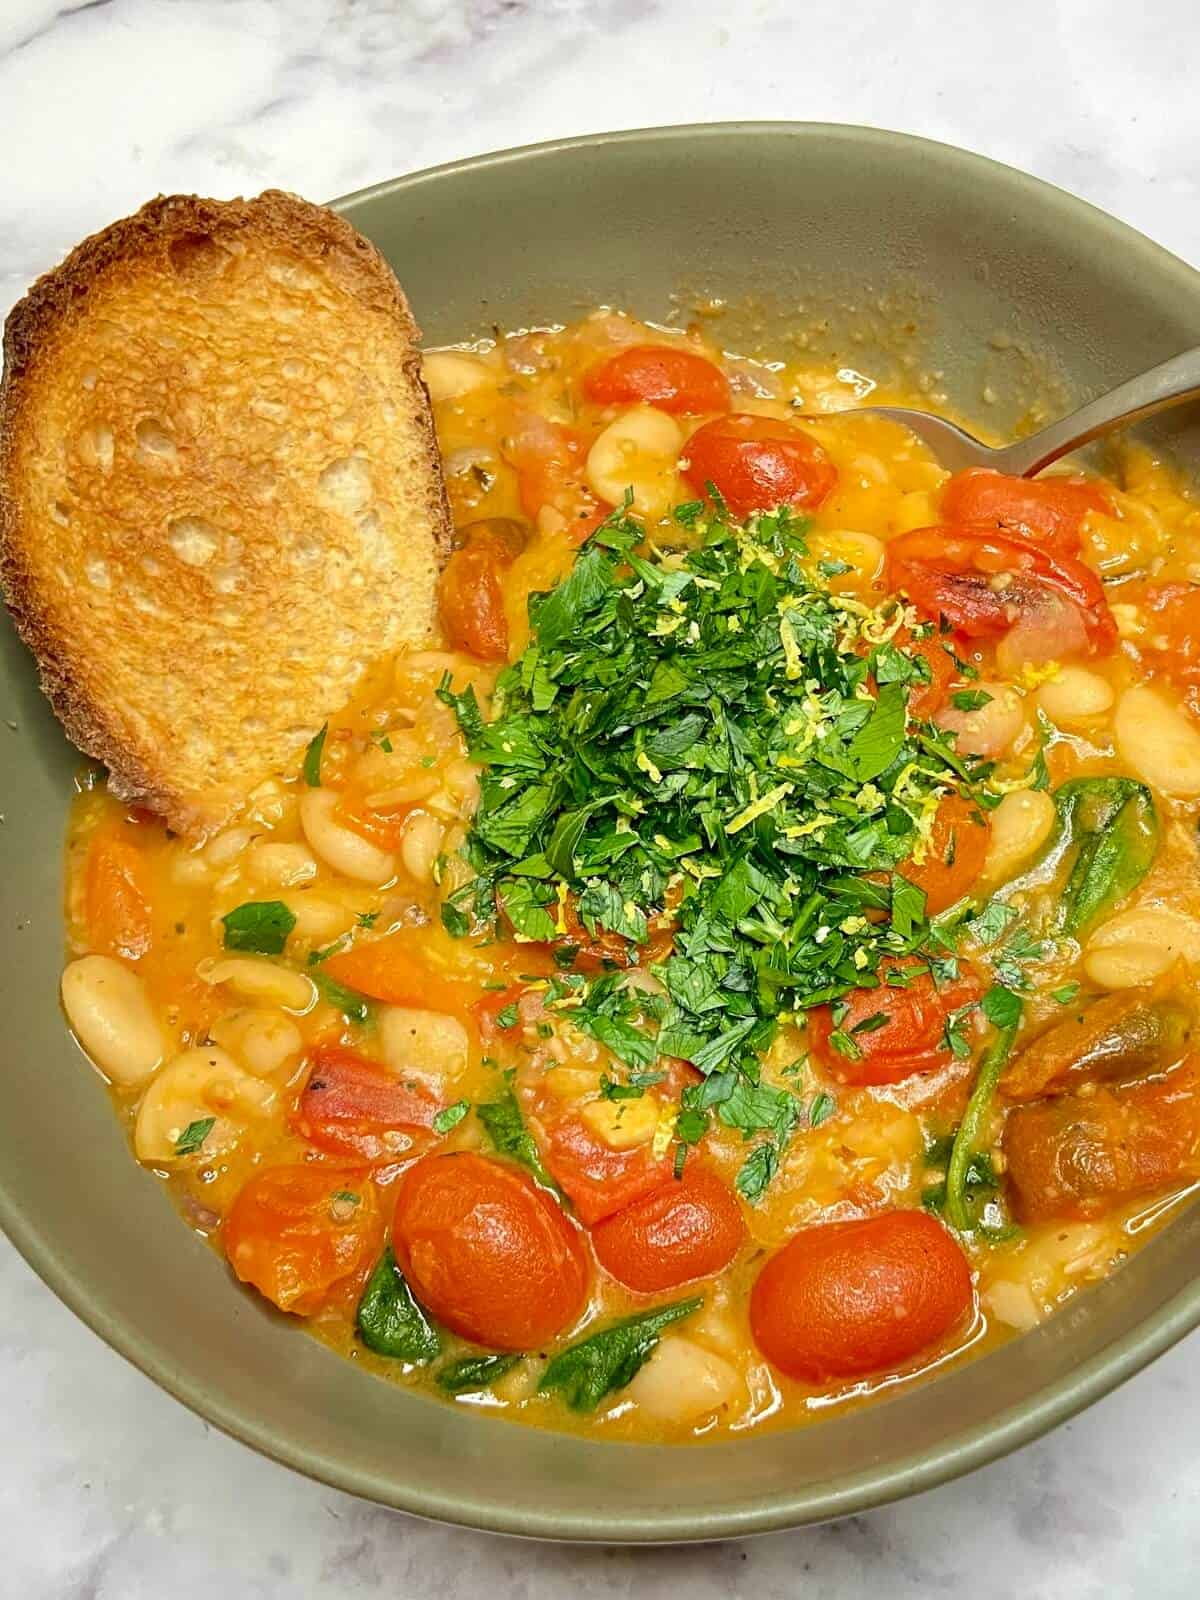 Stew served in a bowl with fresh chopped herbs and toasted baguette.